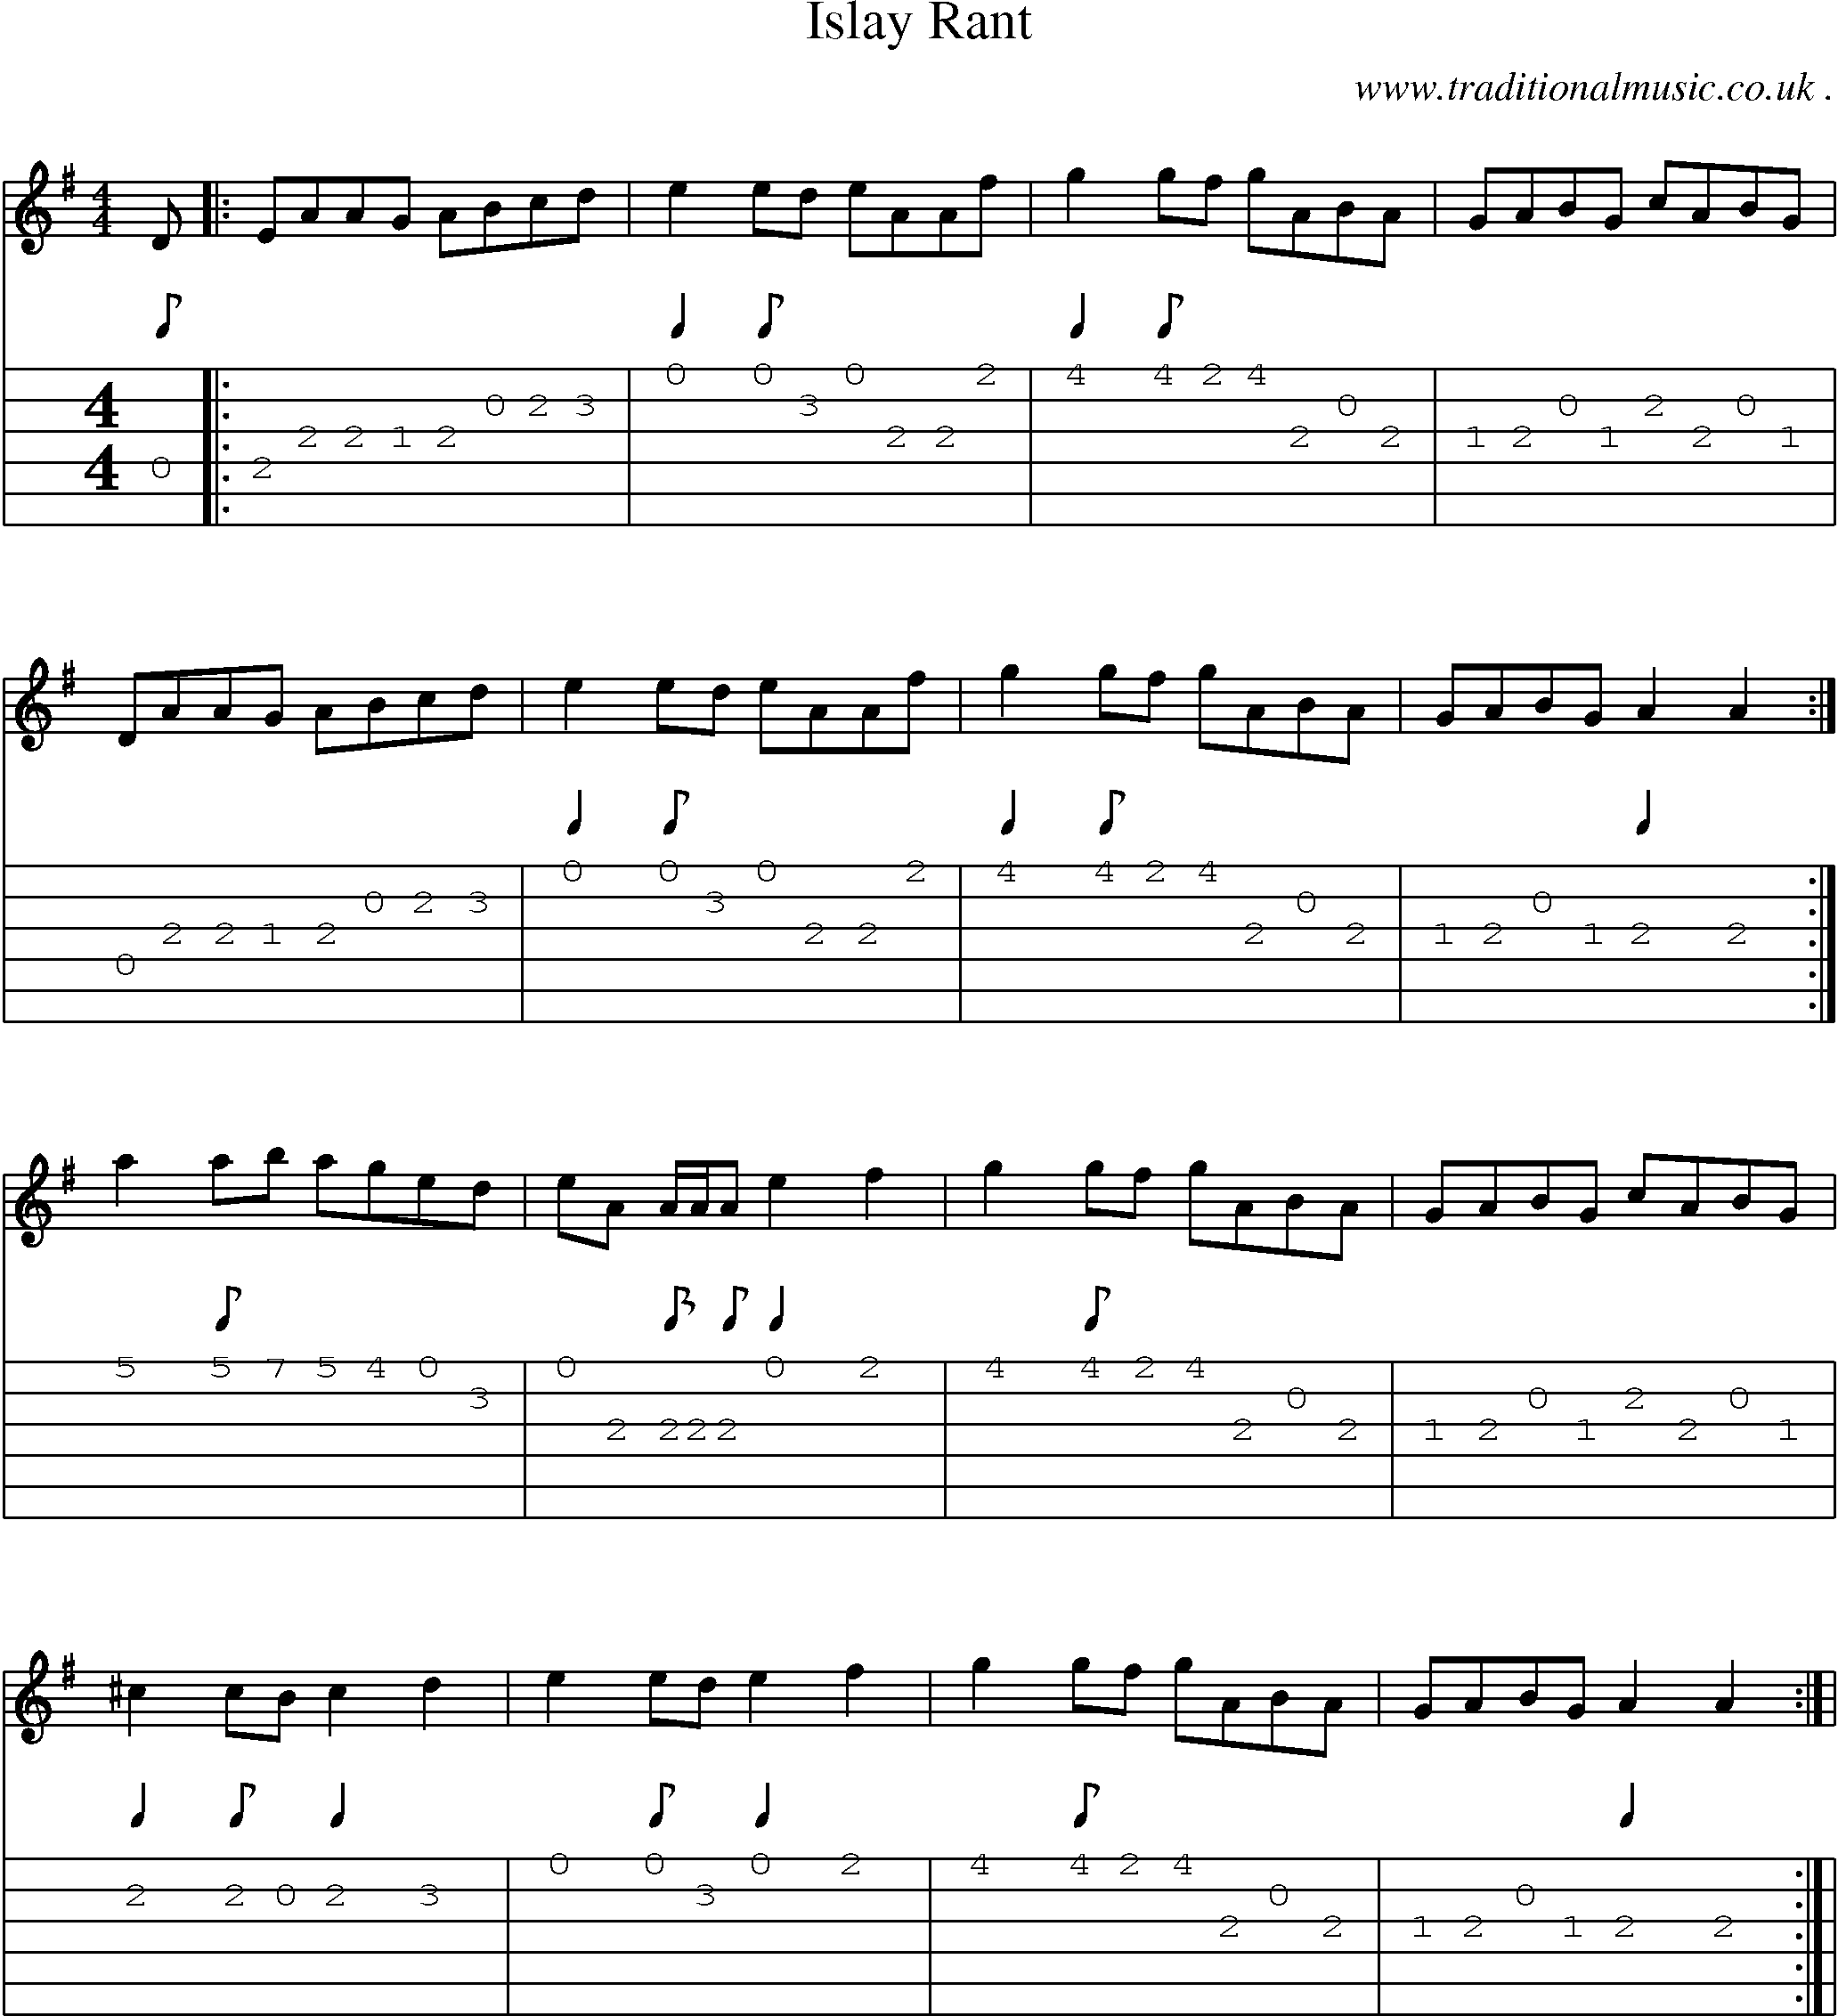 Sheet-music  score, Chords and Guitar Tabs for Islay Rant